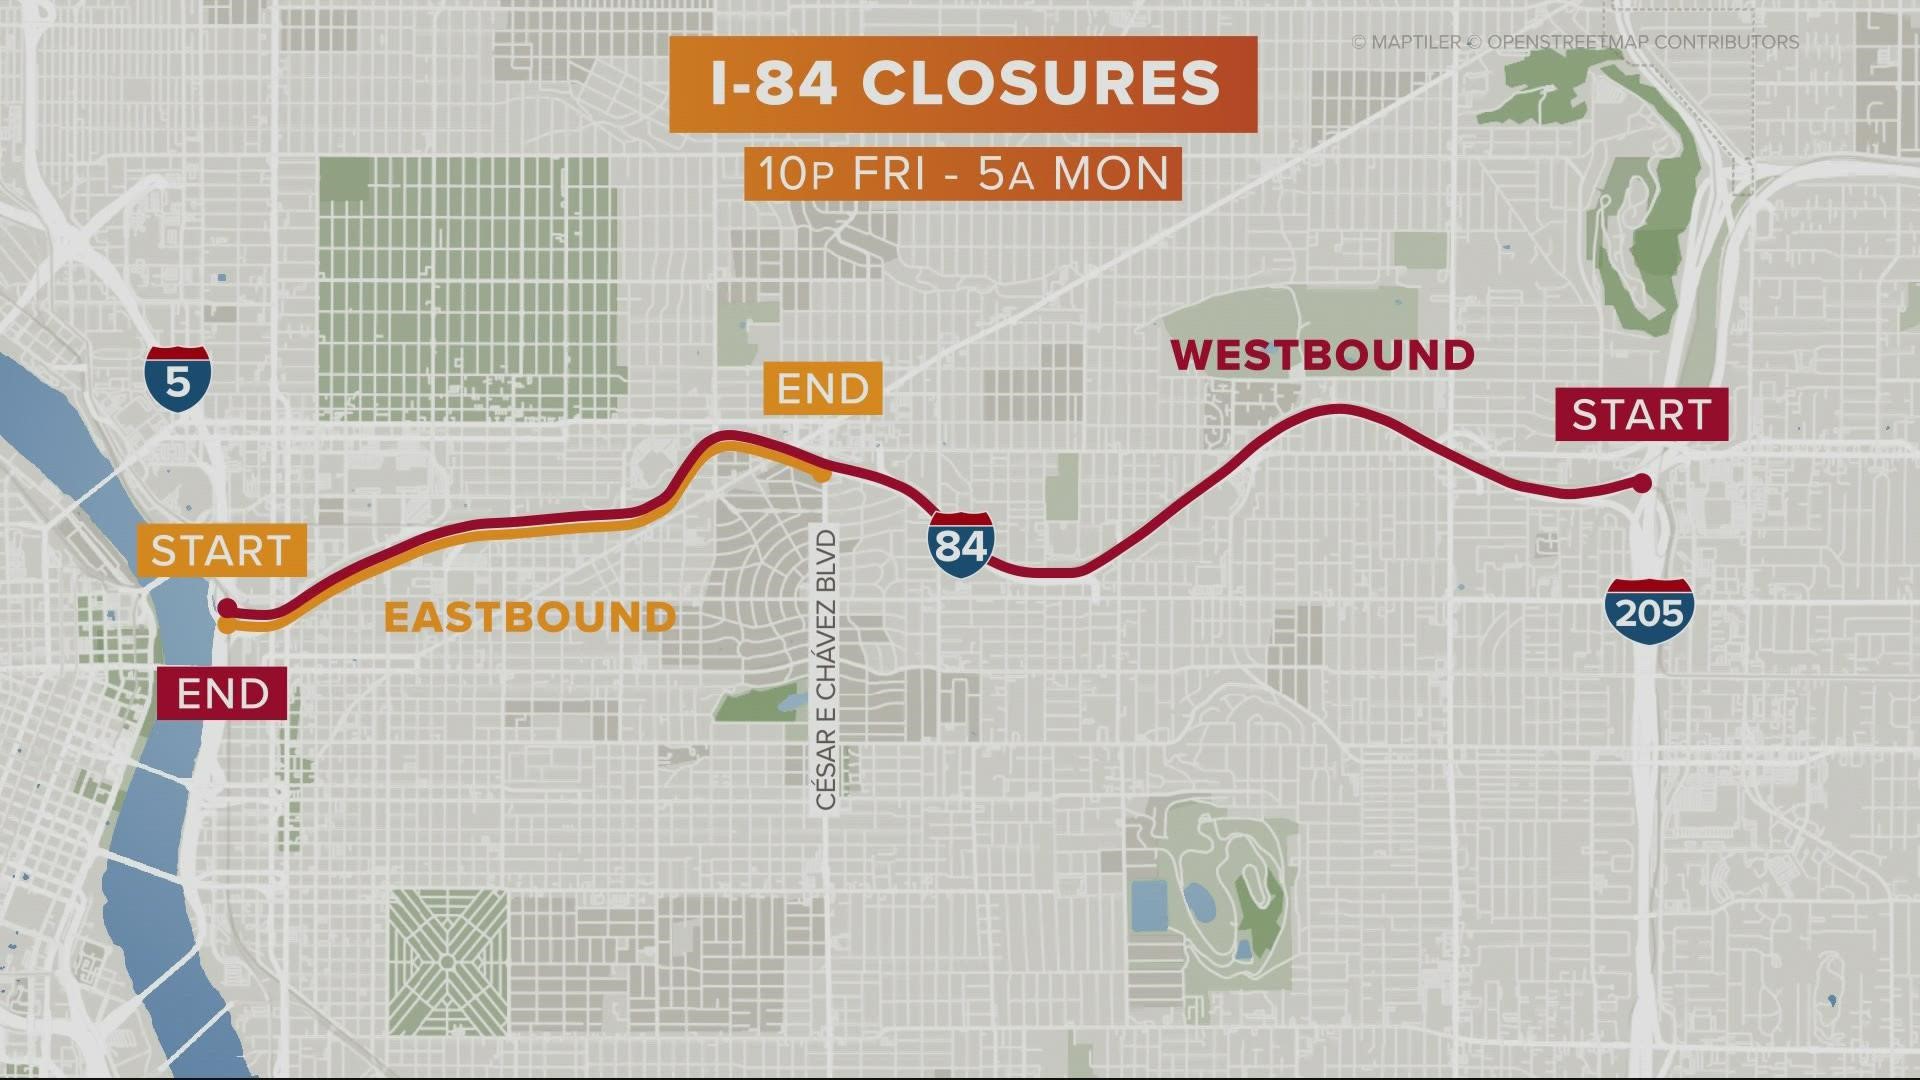 A stretch of I-84 will be closed in both directions, starting Friday night. And an improvement project near the Lloyd Center will disrupt MAX service.